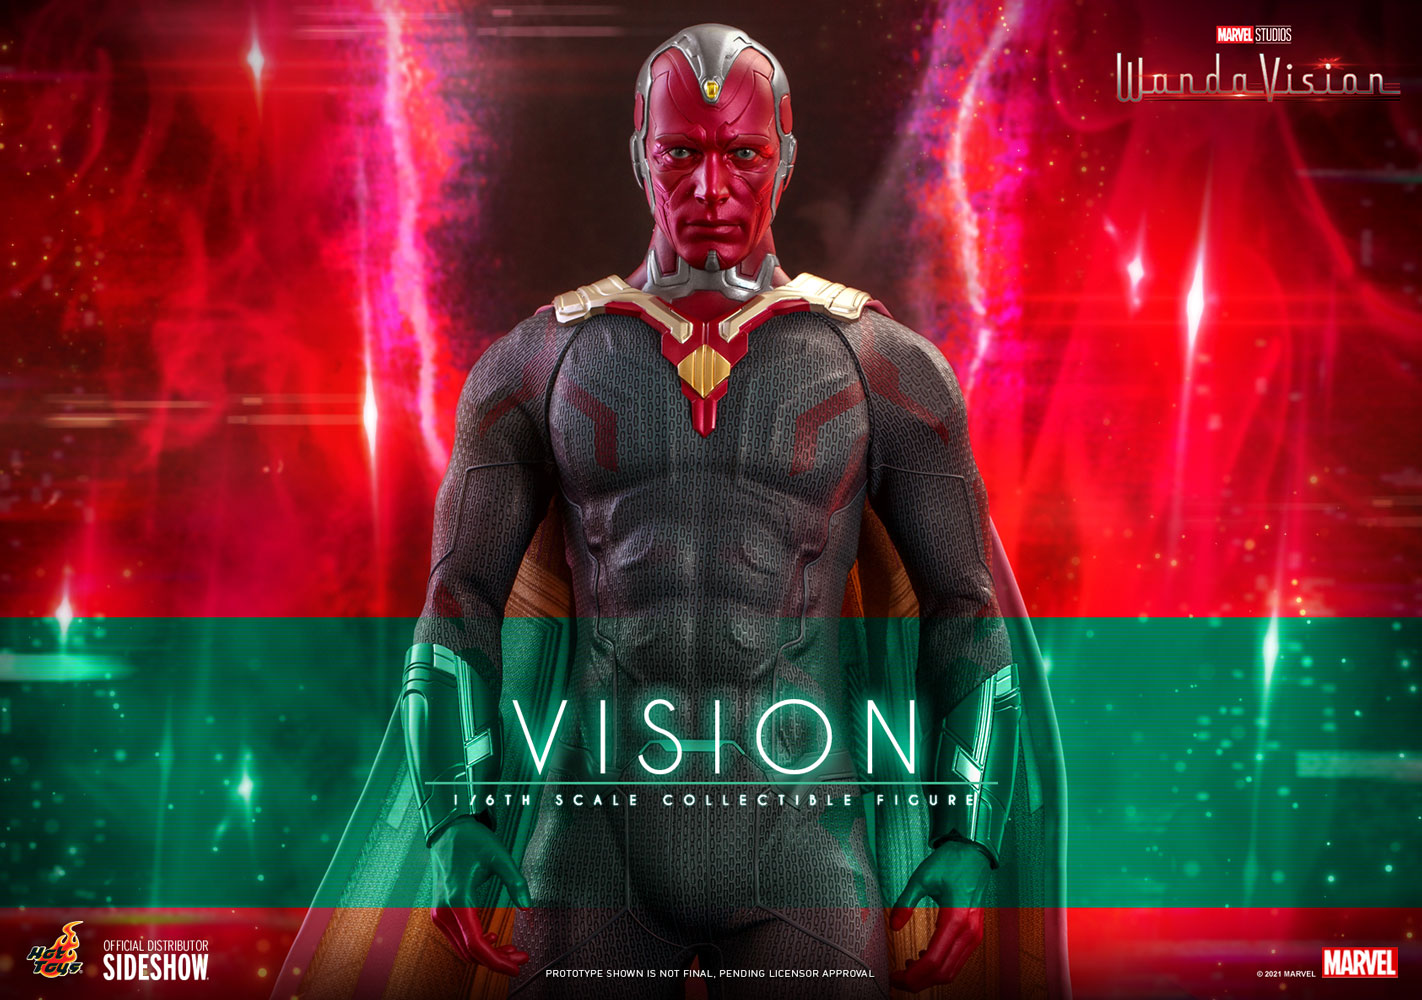 vision-sixth-scale-figure-by-hot-toys_marvel_gallery_6046e0d360033.jpg